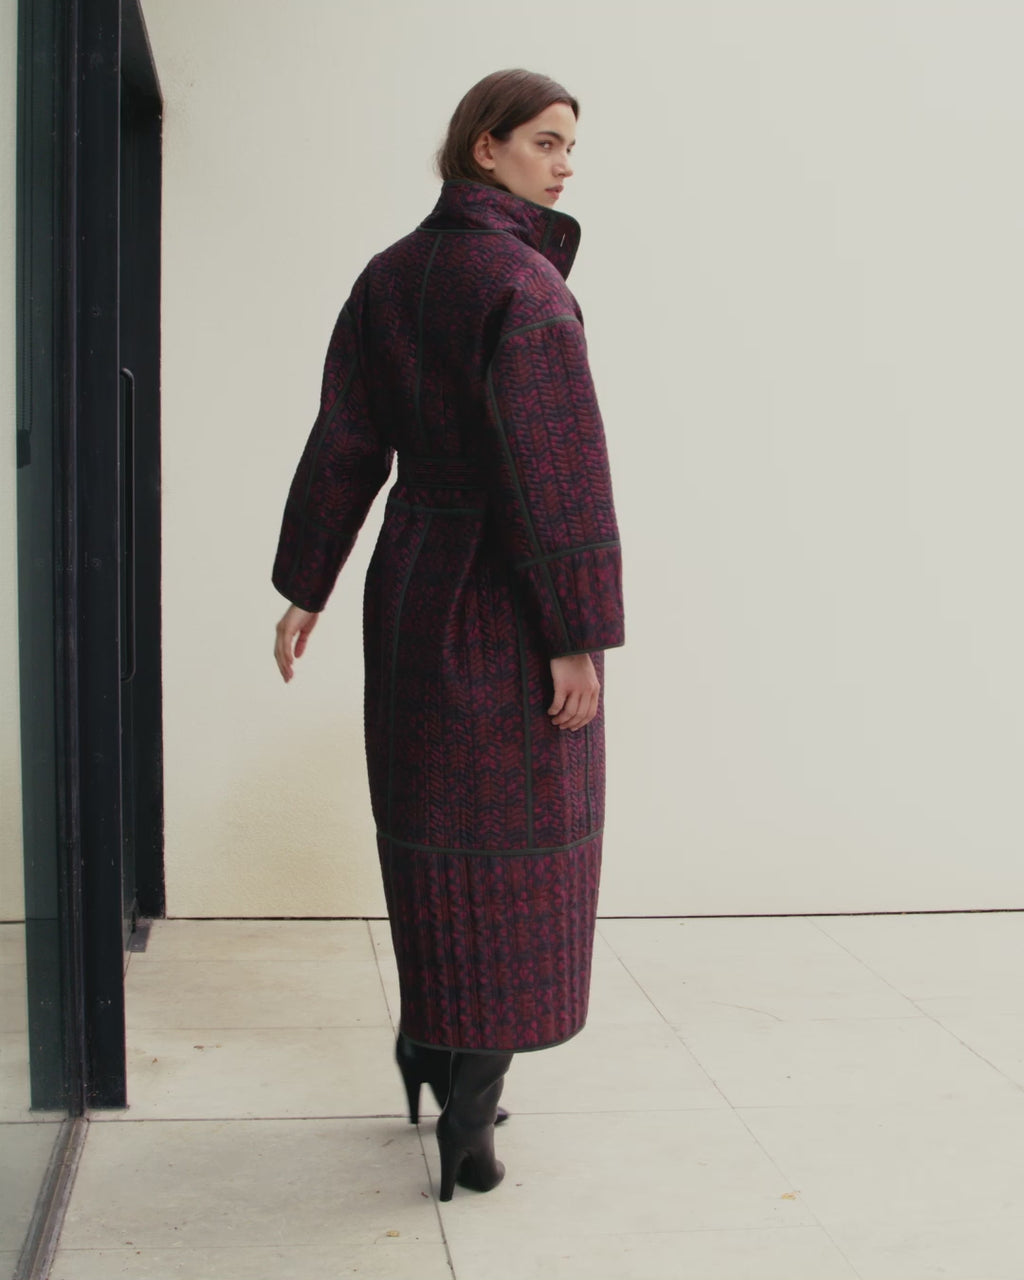 Wiggy Kit | Reversible Quilted Coat | Video of Model Wearing Reversible Quilted Coat in Pink and Black Print